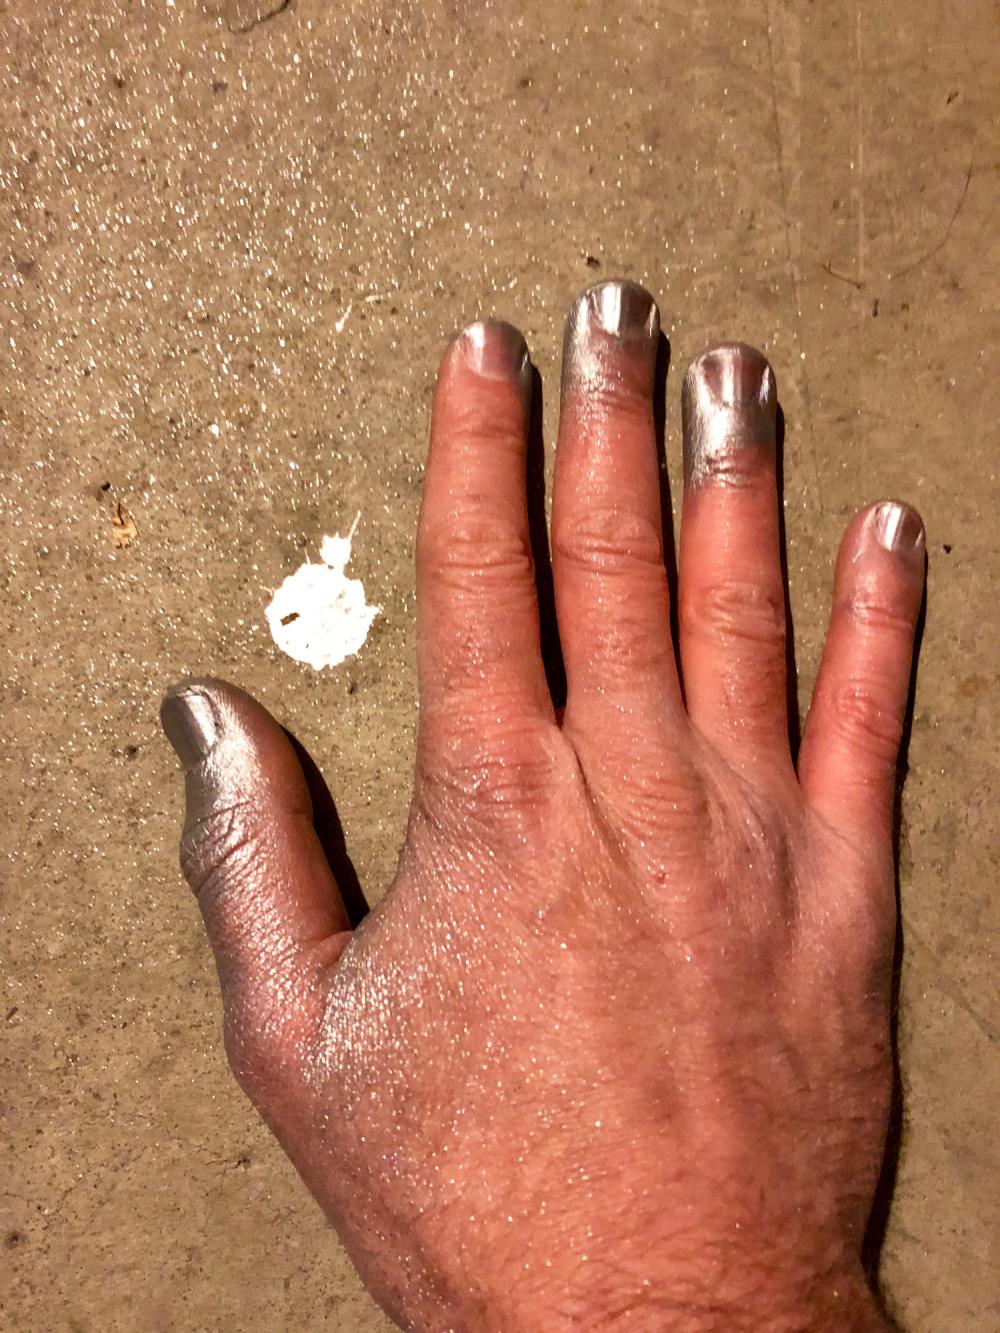 Right hand with silver spray paint